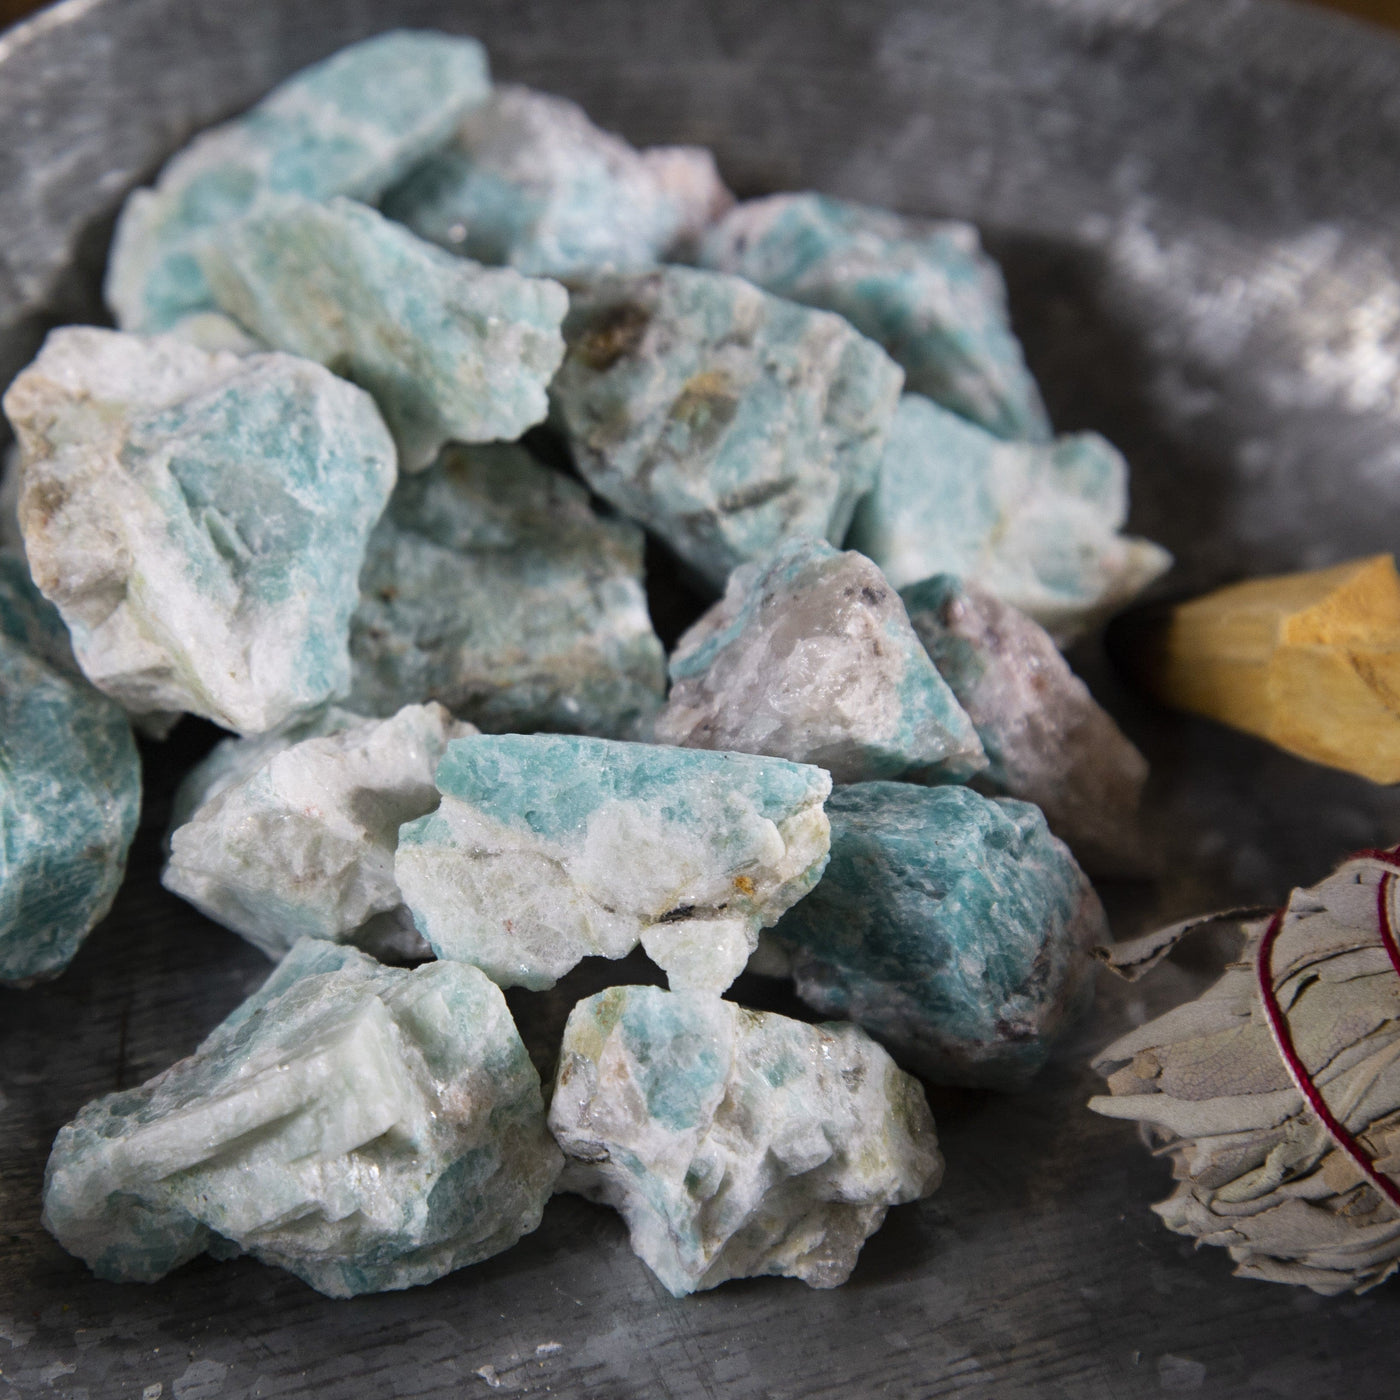 Picture of amazonite chunks being displayed on an offering bowl next to some sage and palo santo.